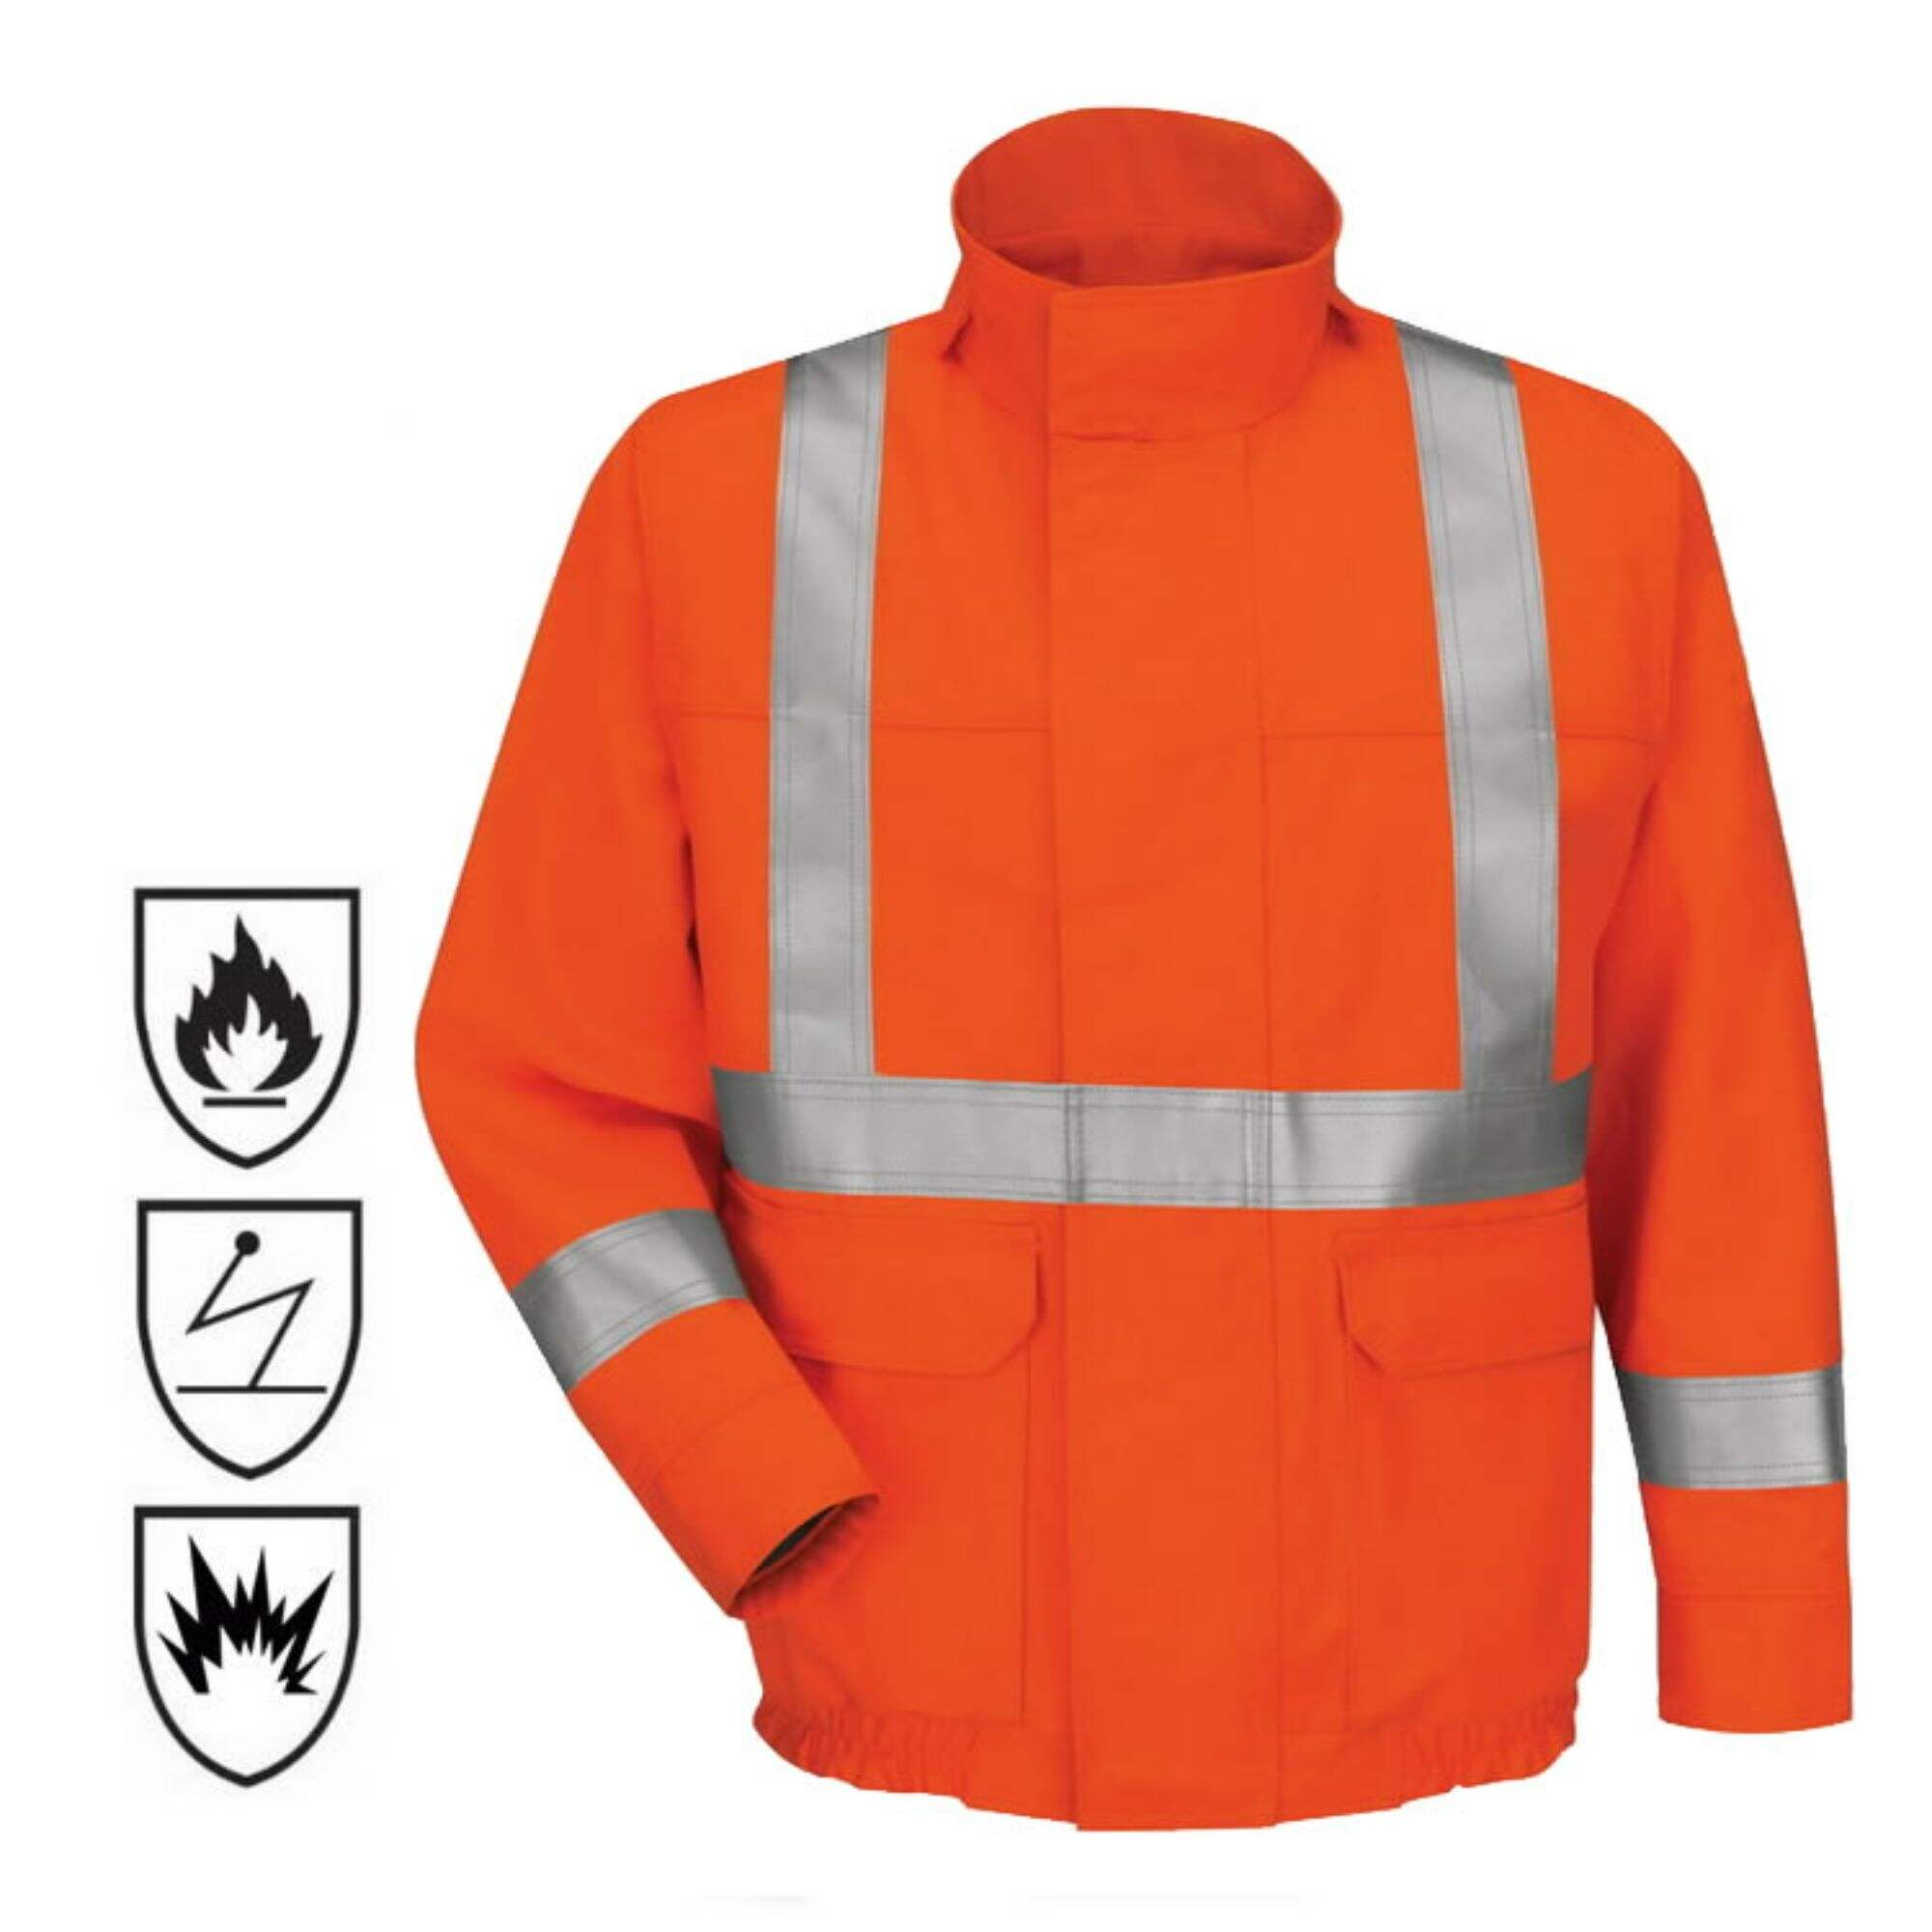 Industrial AntiStatic Explosionproof Fireproof Nomex Jacket Traffic Minging Clothes